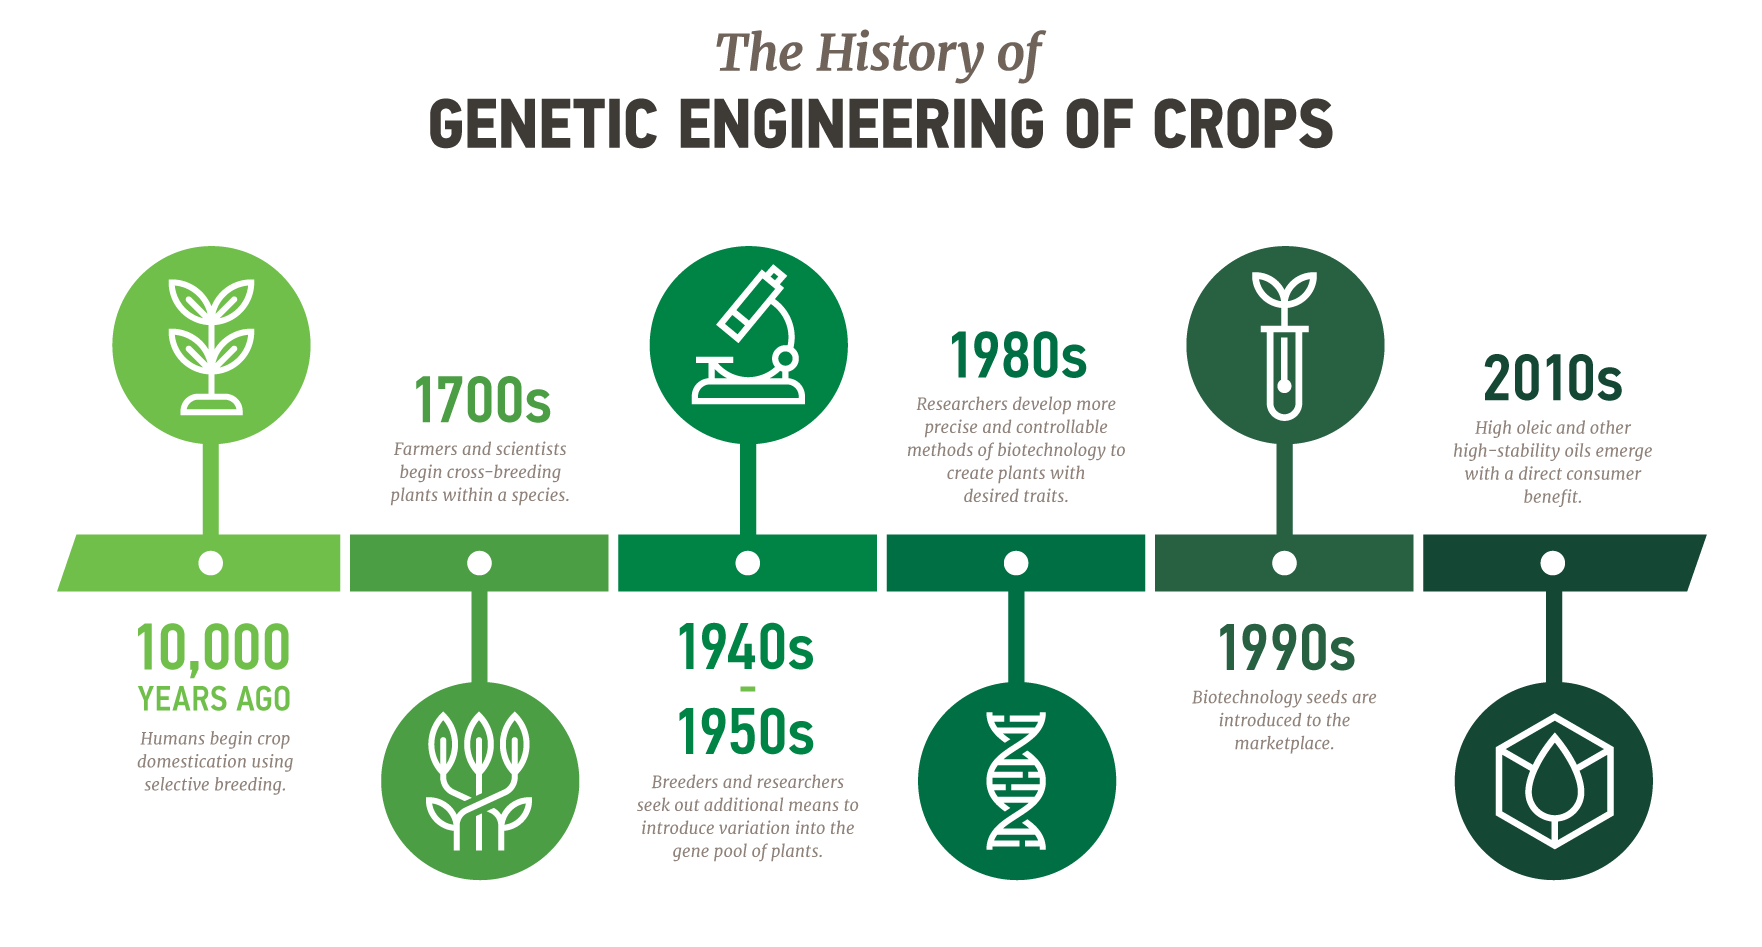 The History of Genetic Engineering of Crops